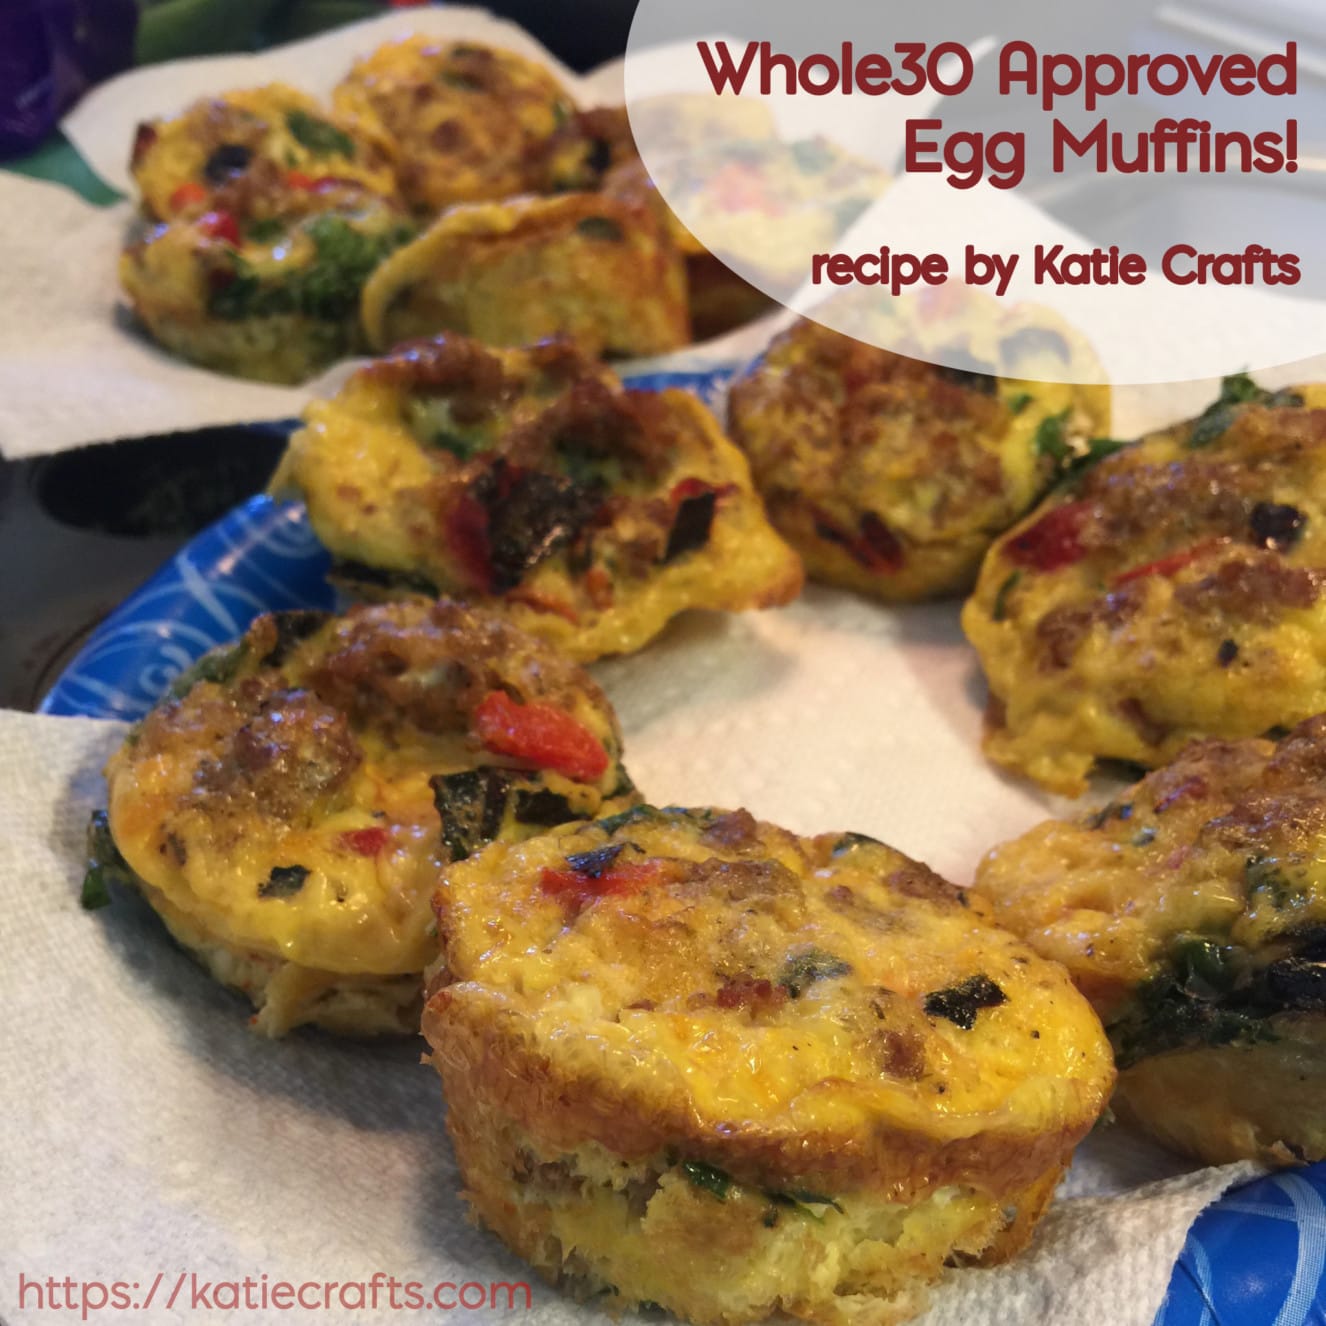 Whole30 Approved Egg Muffins on Katie Crafts; https://www.katiecrafts.com